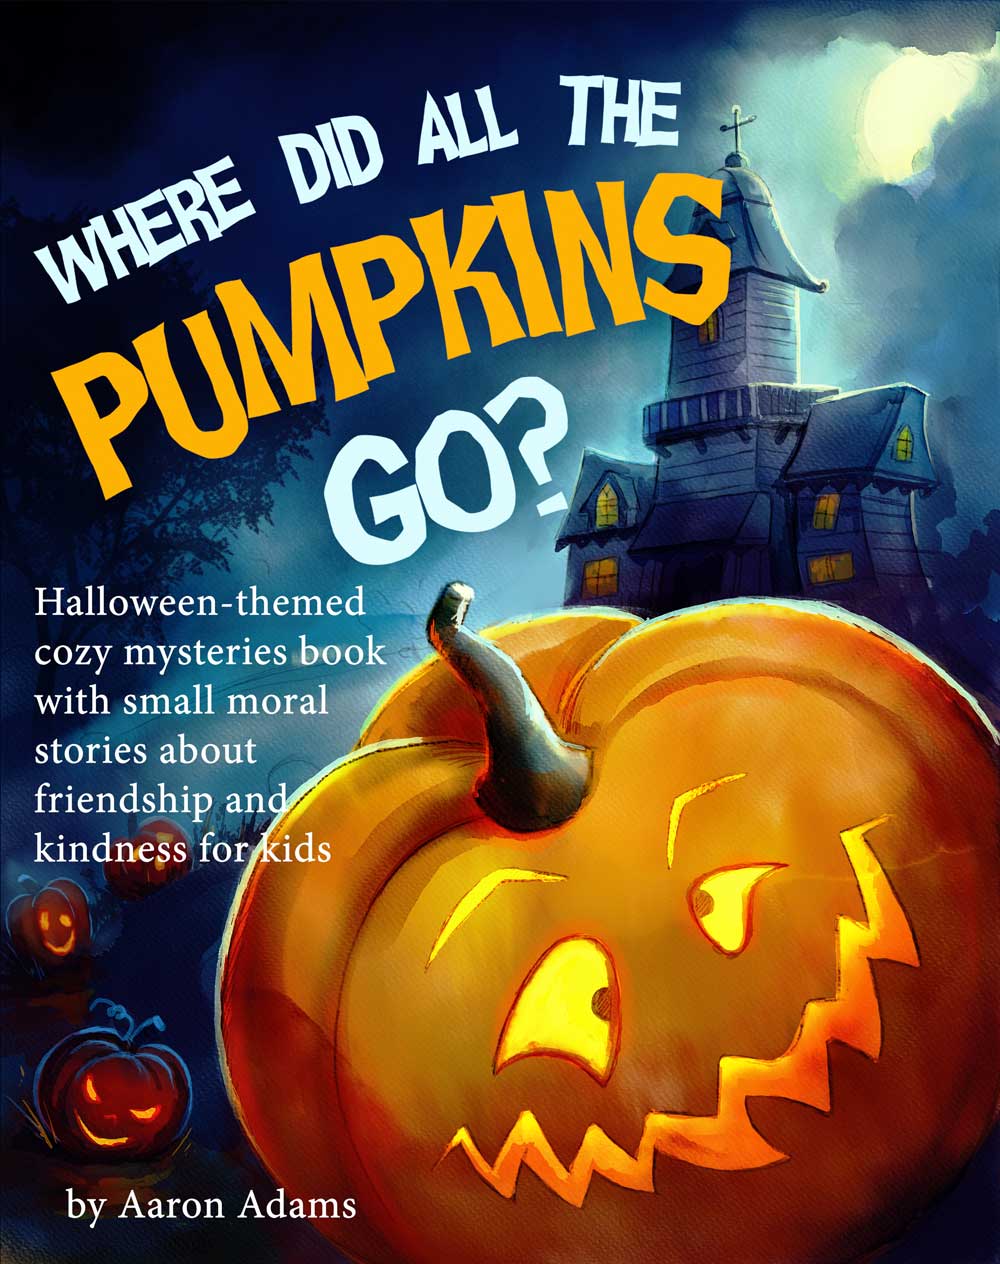 FREE: Where did all the pumpkins go? by Aaron Adams